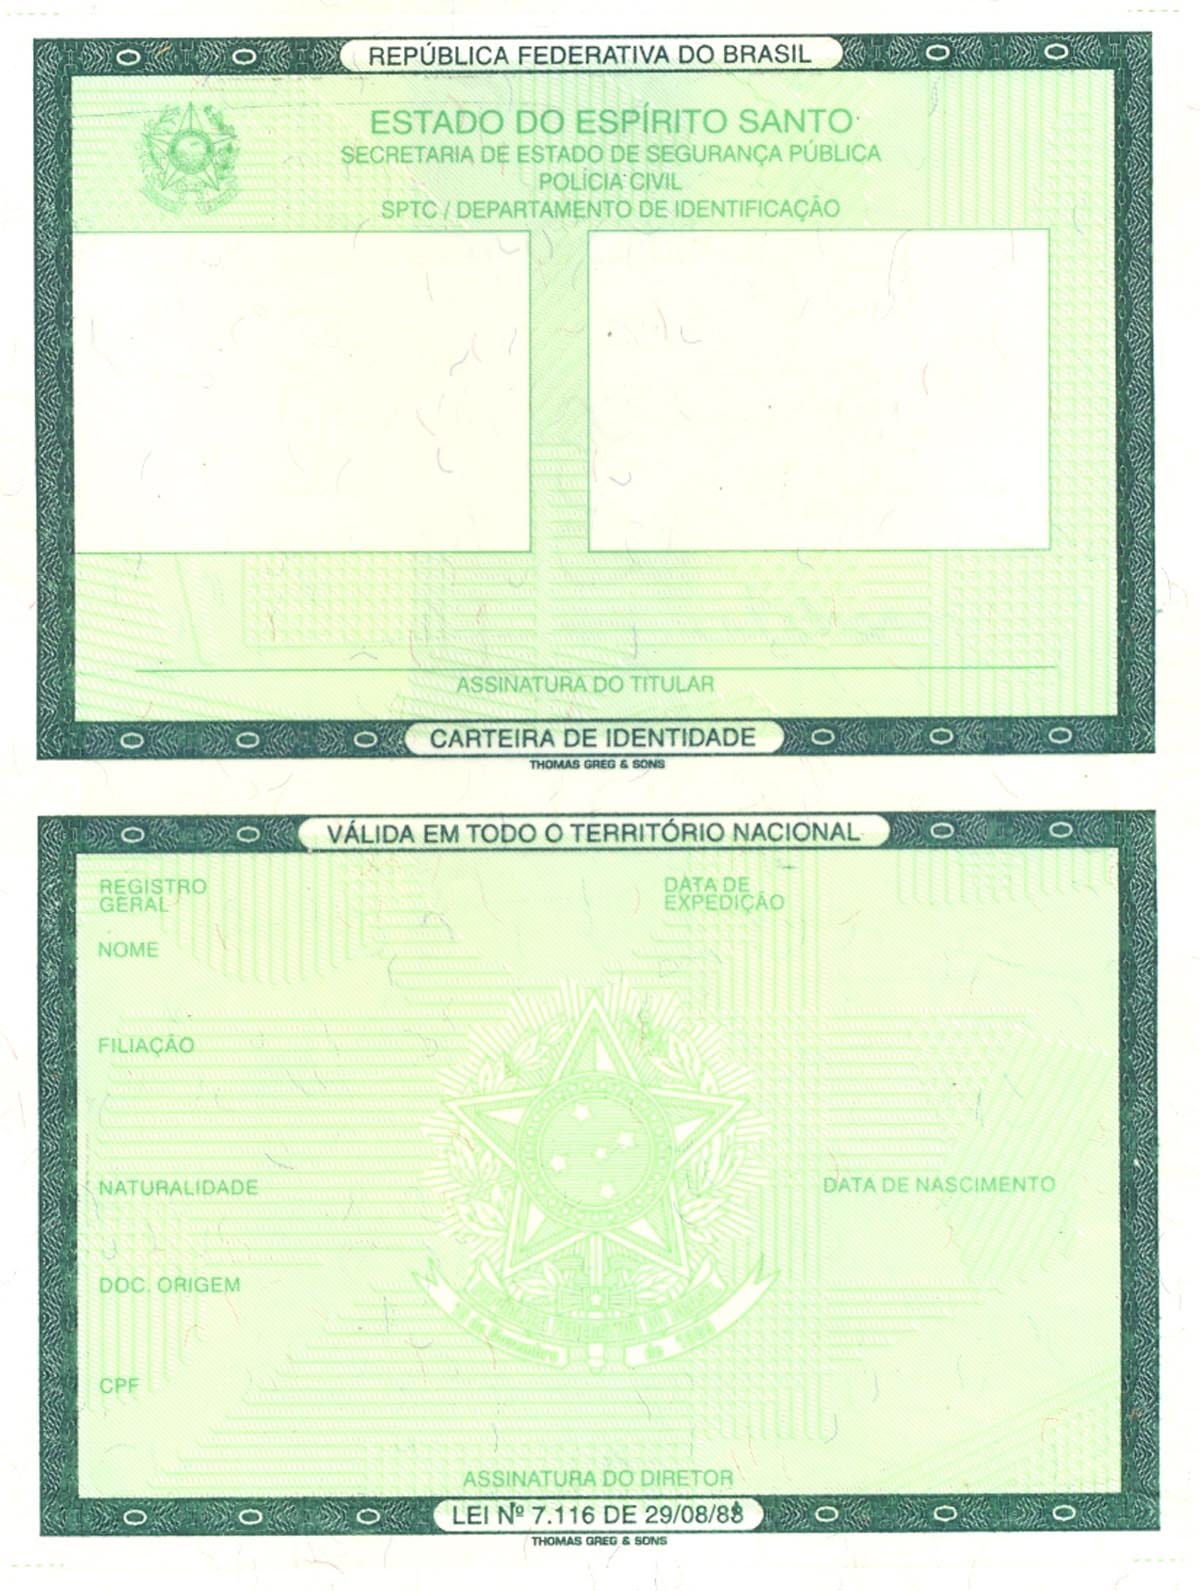 Brazil's National ID System — disorganised and dysfunctional